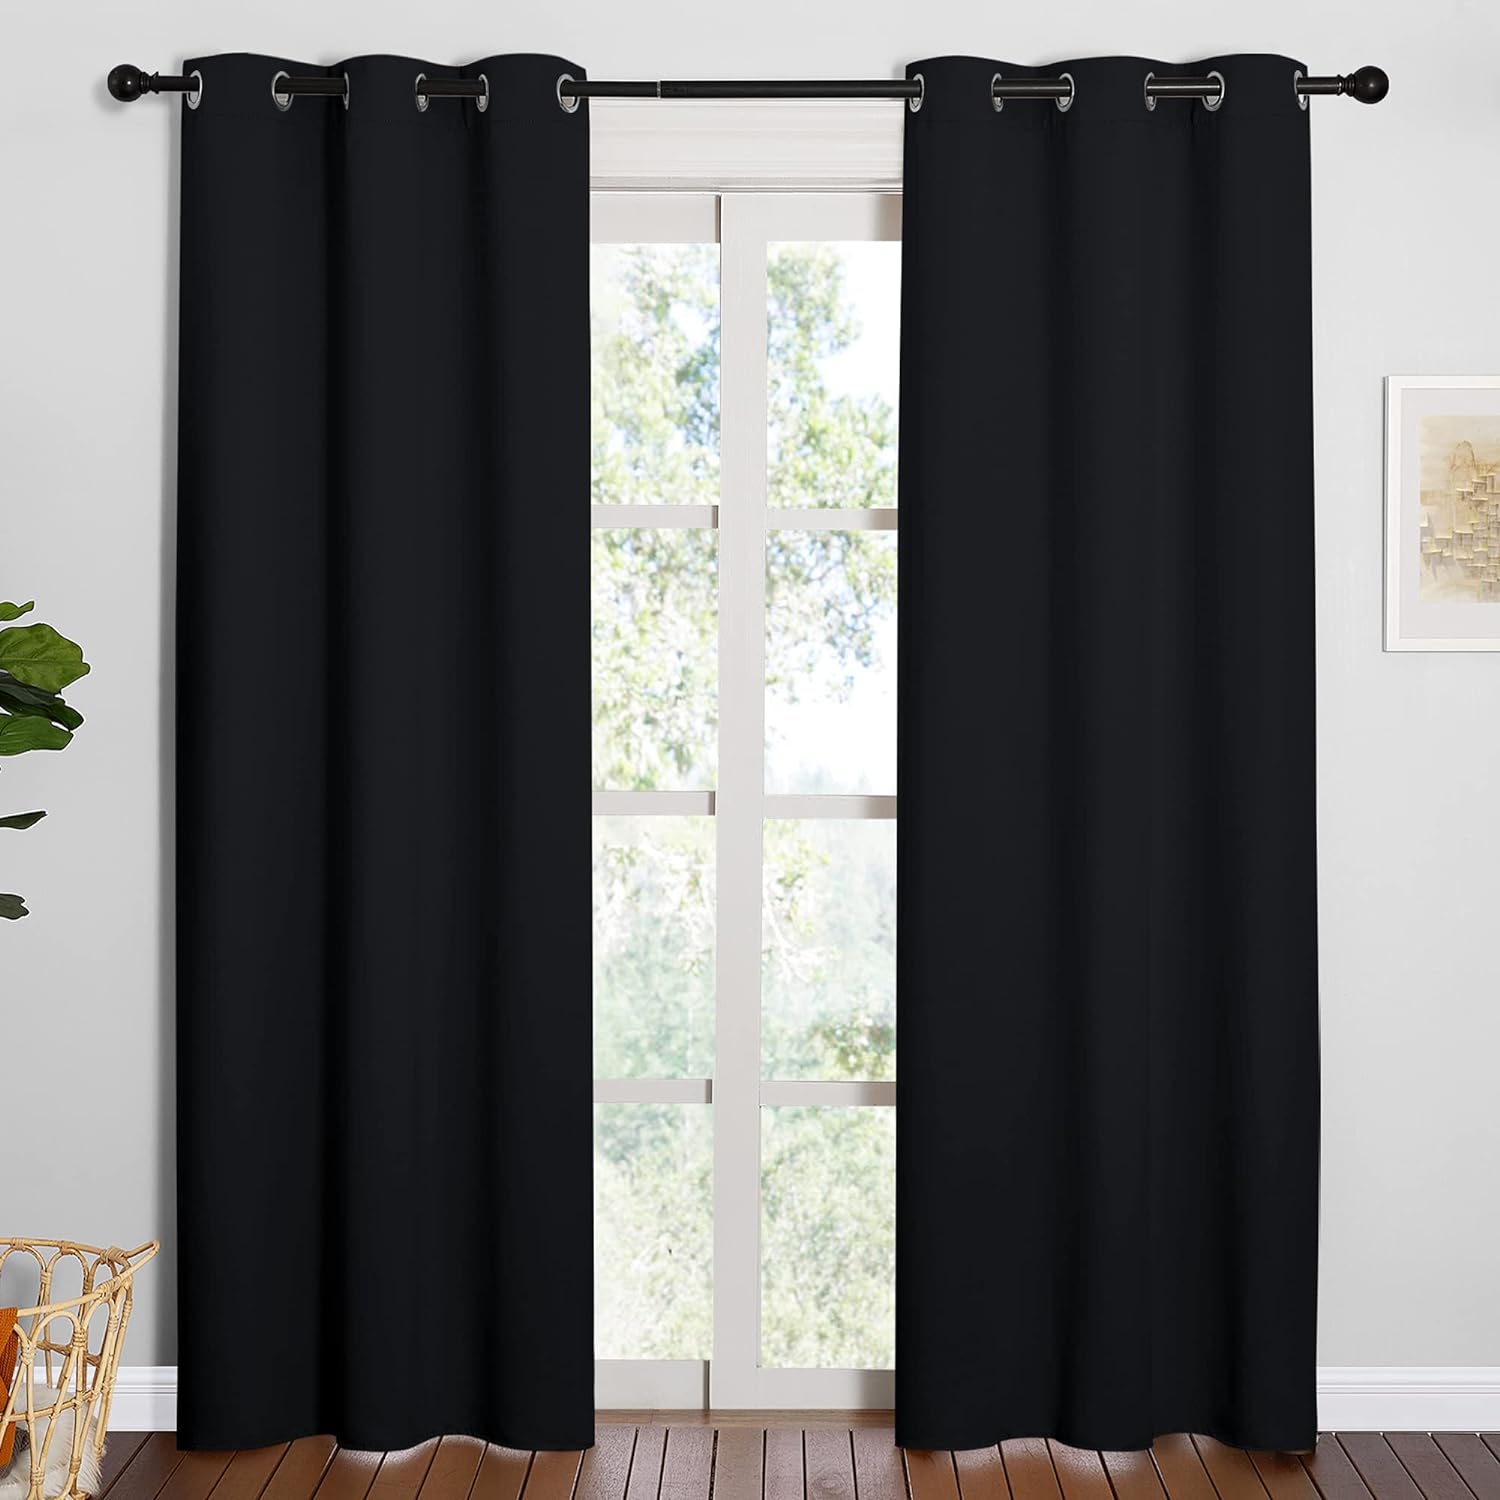 Thermal Insulated Grommet Curtains Review